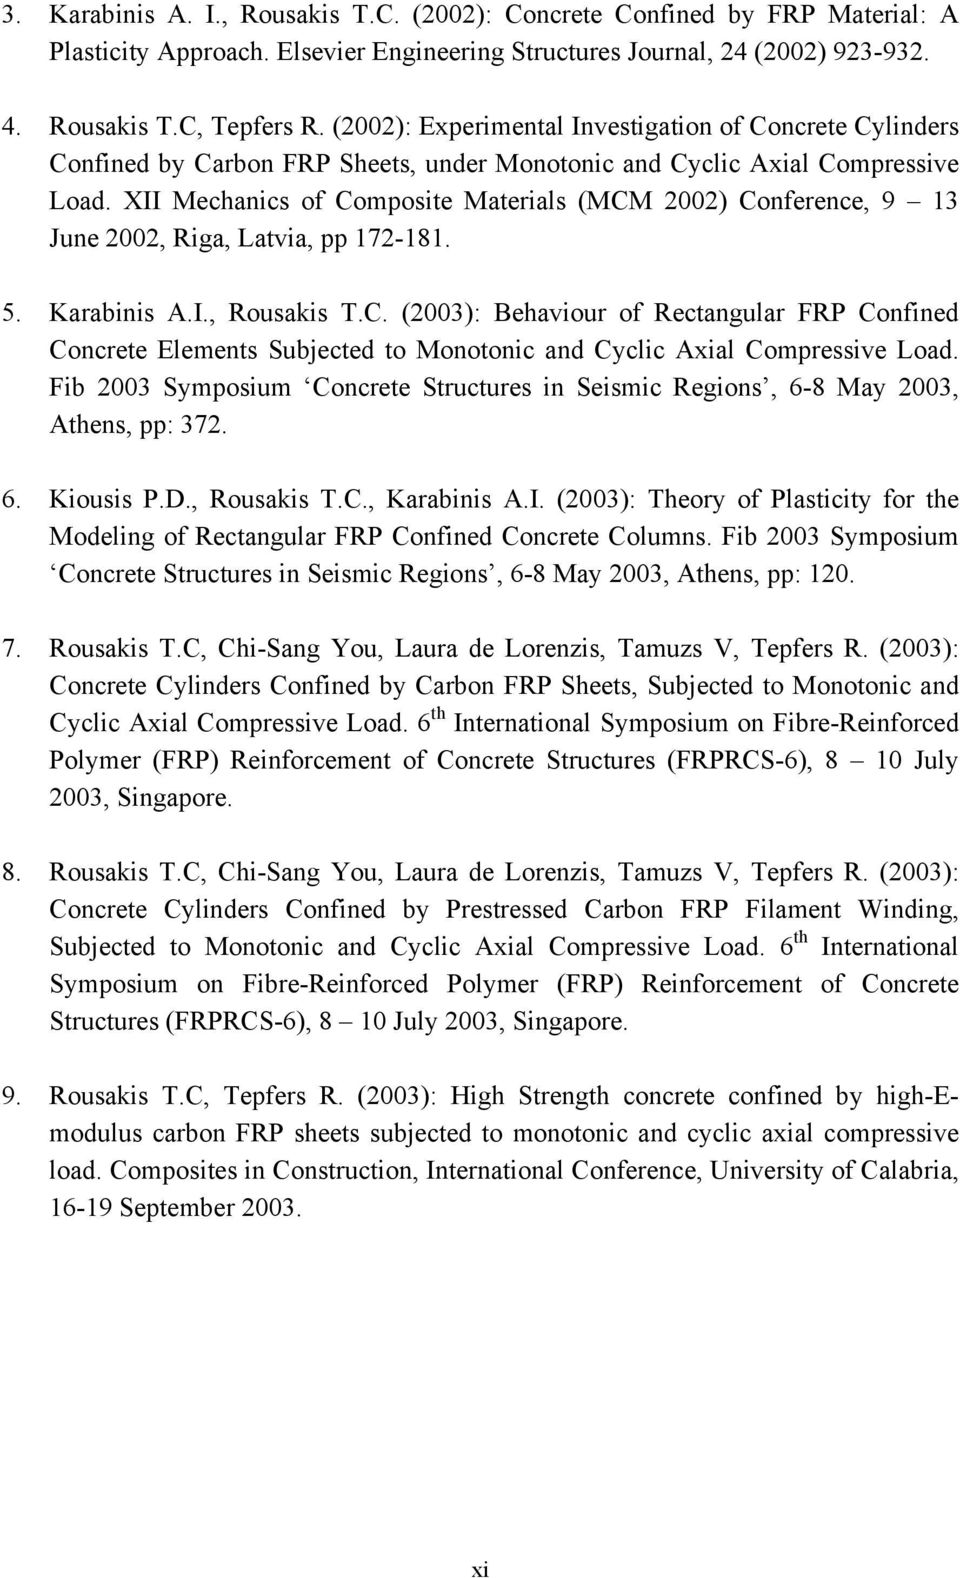 XII Mechanics of Composite Materials (MCM 22) Conference, 9 13 June 22, Riga, Latvia, pp 172-181. 5. Karabinis A.I., Rousakis T.C. (23): Behaviour of Rectangular FRP Confined Concrete Elements Subjected to Monotonic and Cyclic Axial Compressive Load.